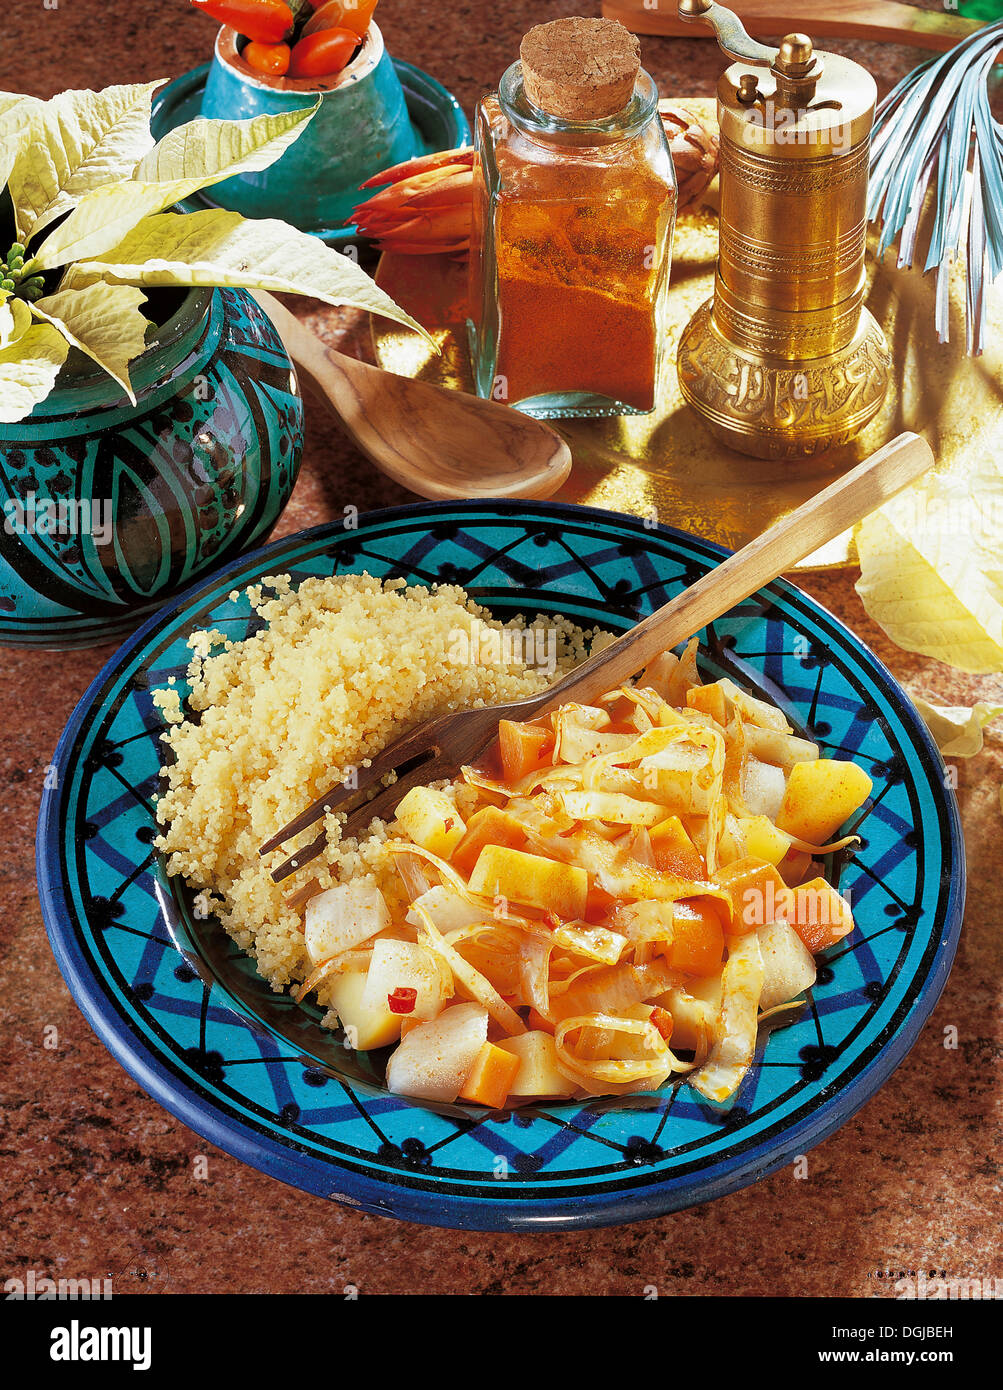 Couscous with cabbage, Morocco. Stock Photo